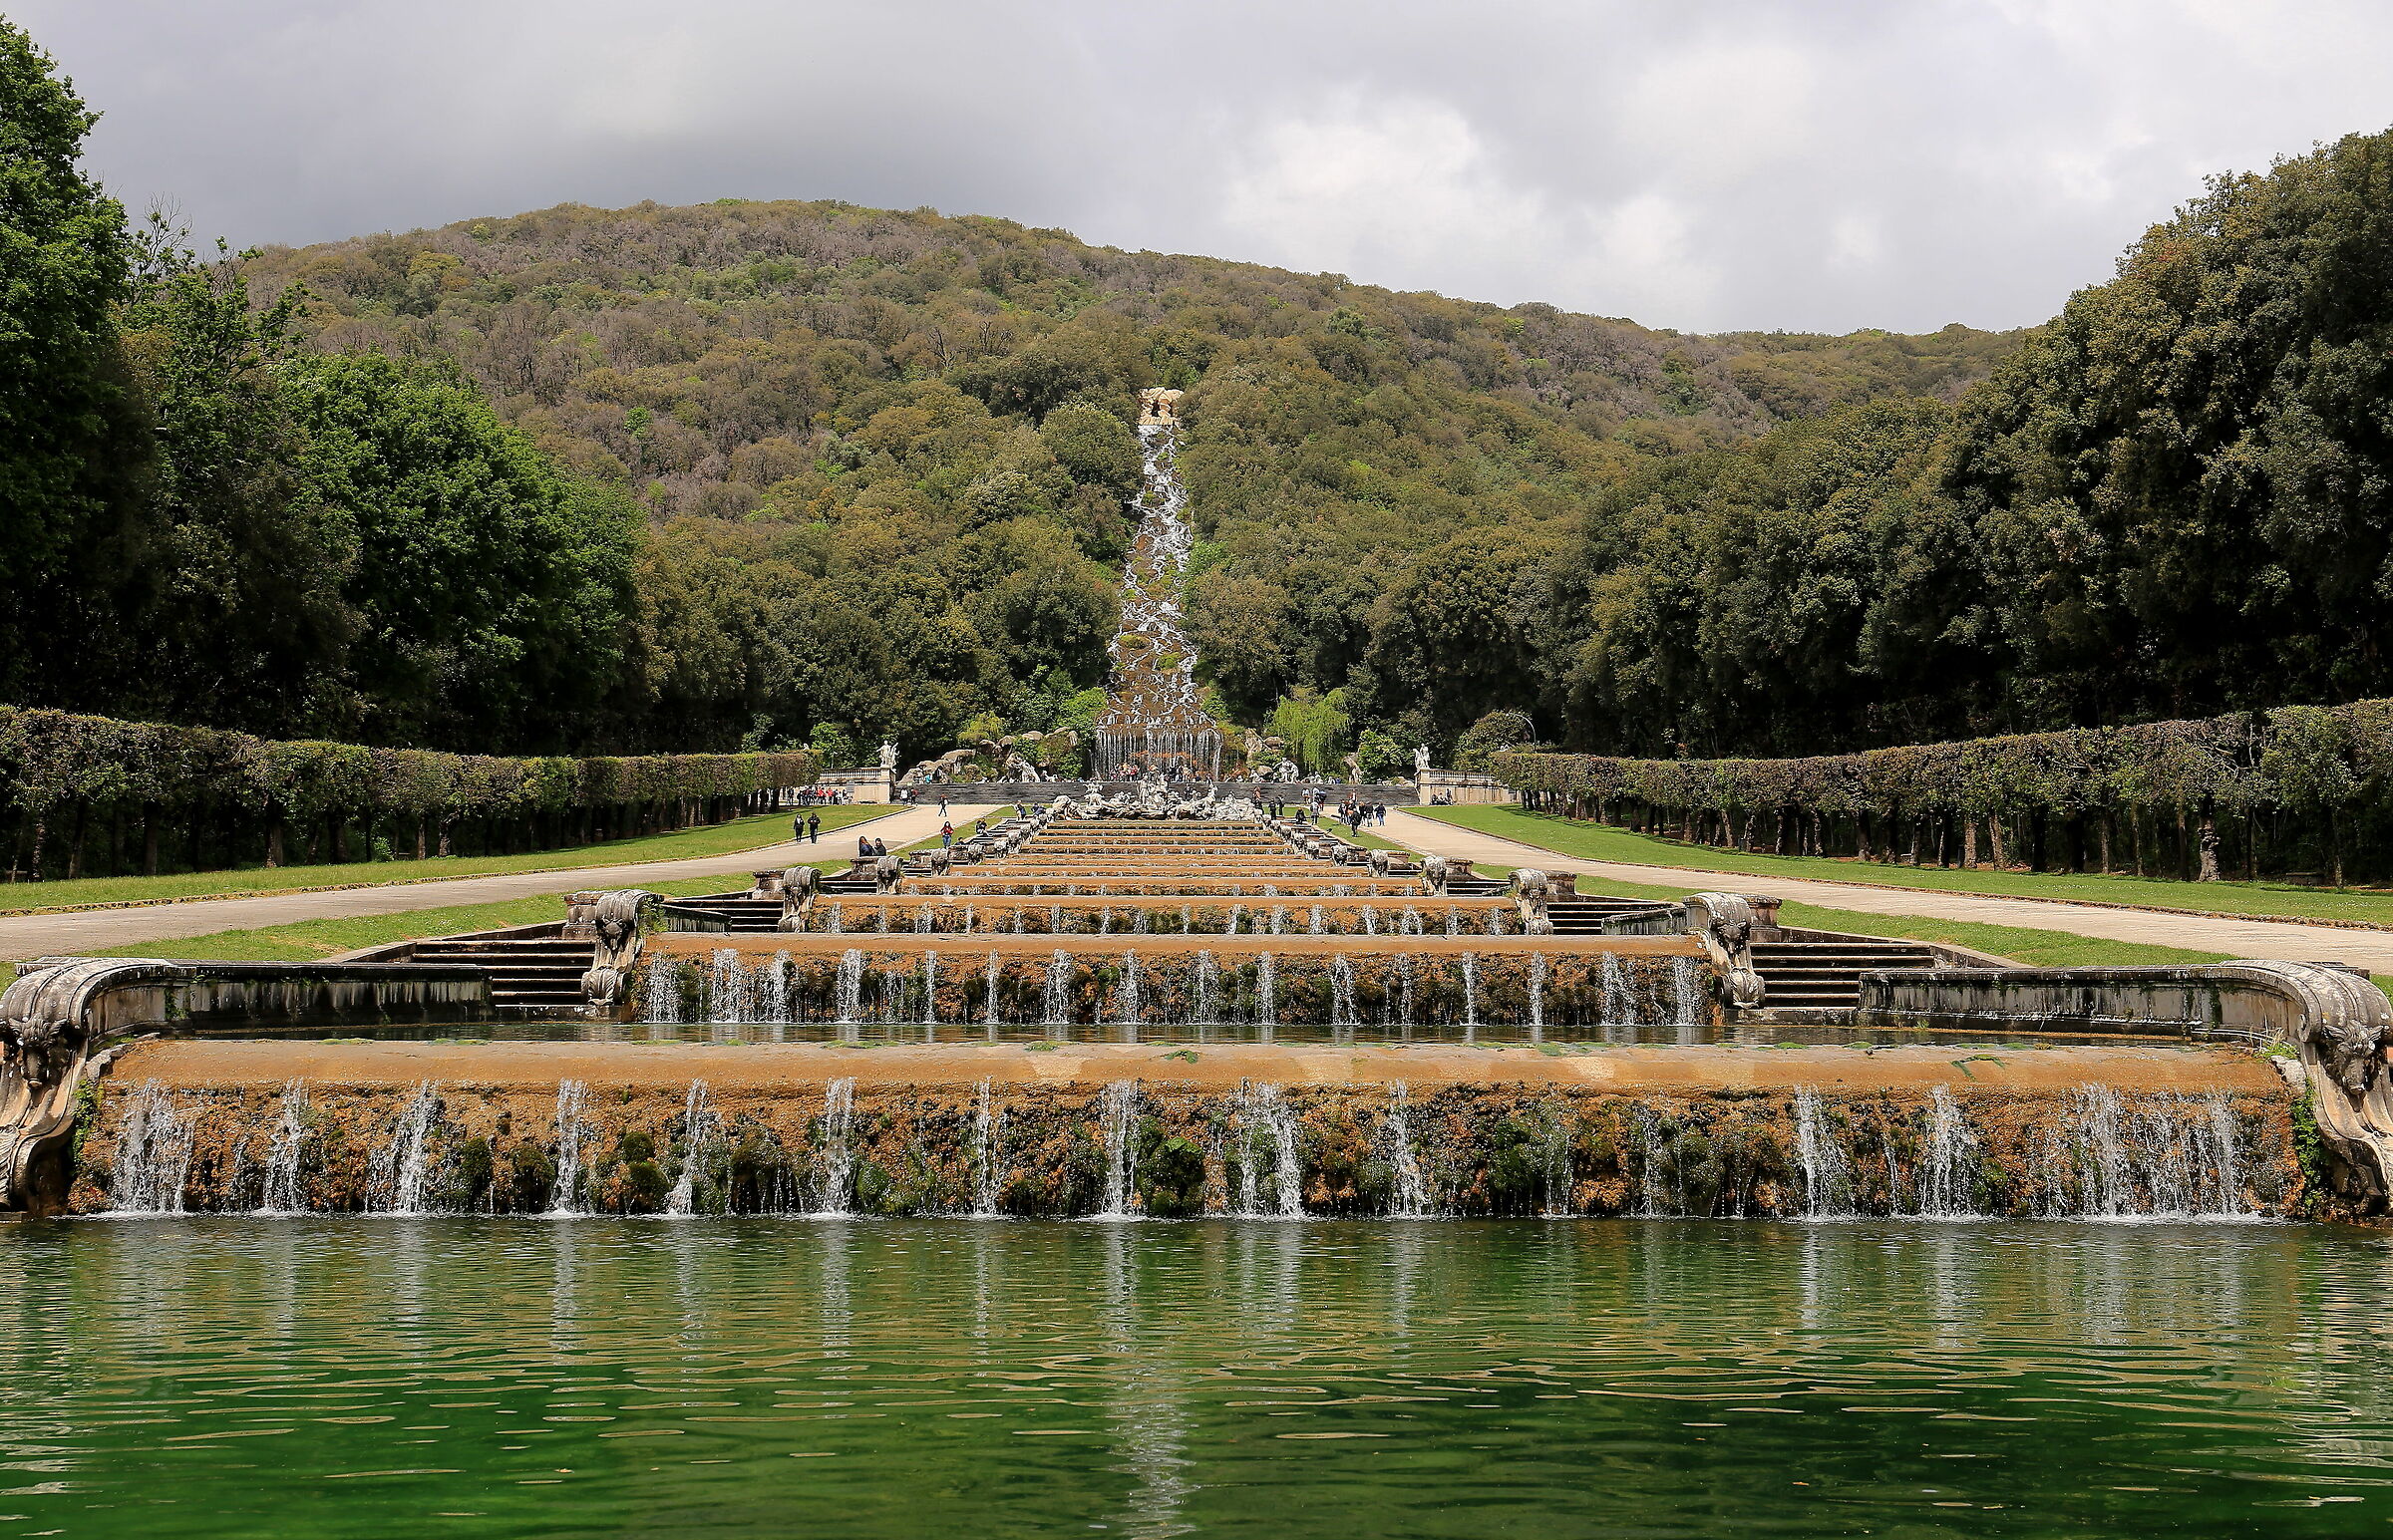 The gardens of the Royal Palace of Caserta 2...